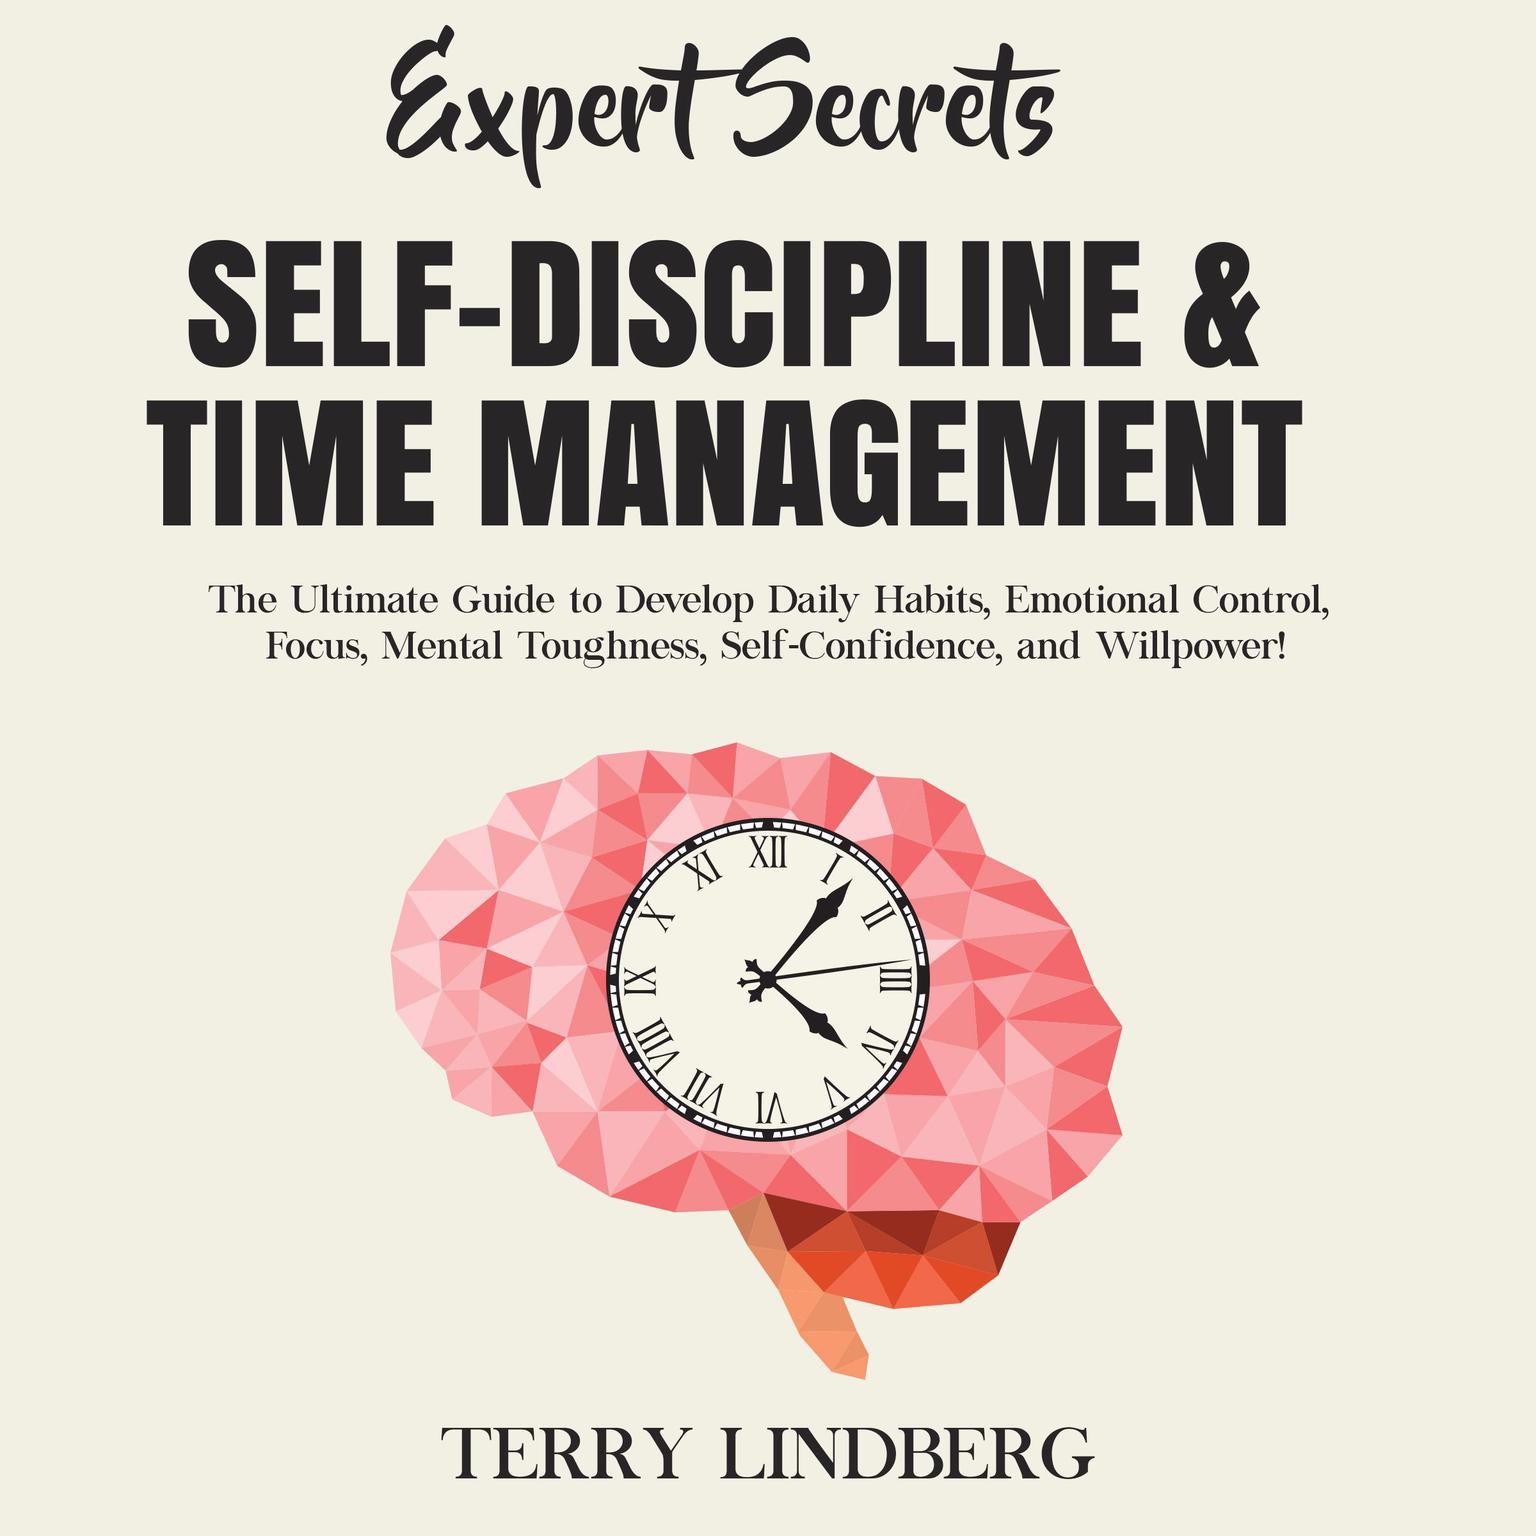 Expert Secrets – Self-Discipline & Time Management: The Ultimate Guide to Develop Daily Habits, Emotional Control, Focus, Mental Toughness, Self-Confidence, and Willpower! Audiobook, by Terry Lindberg